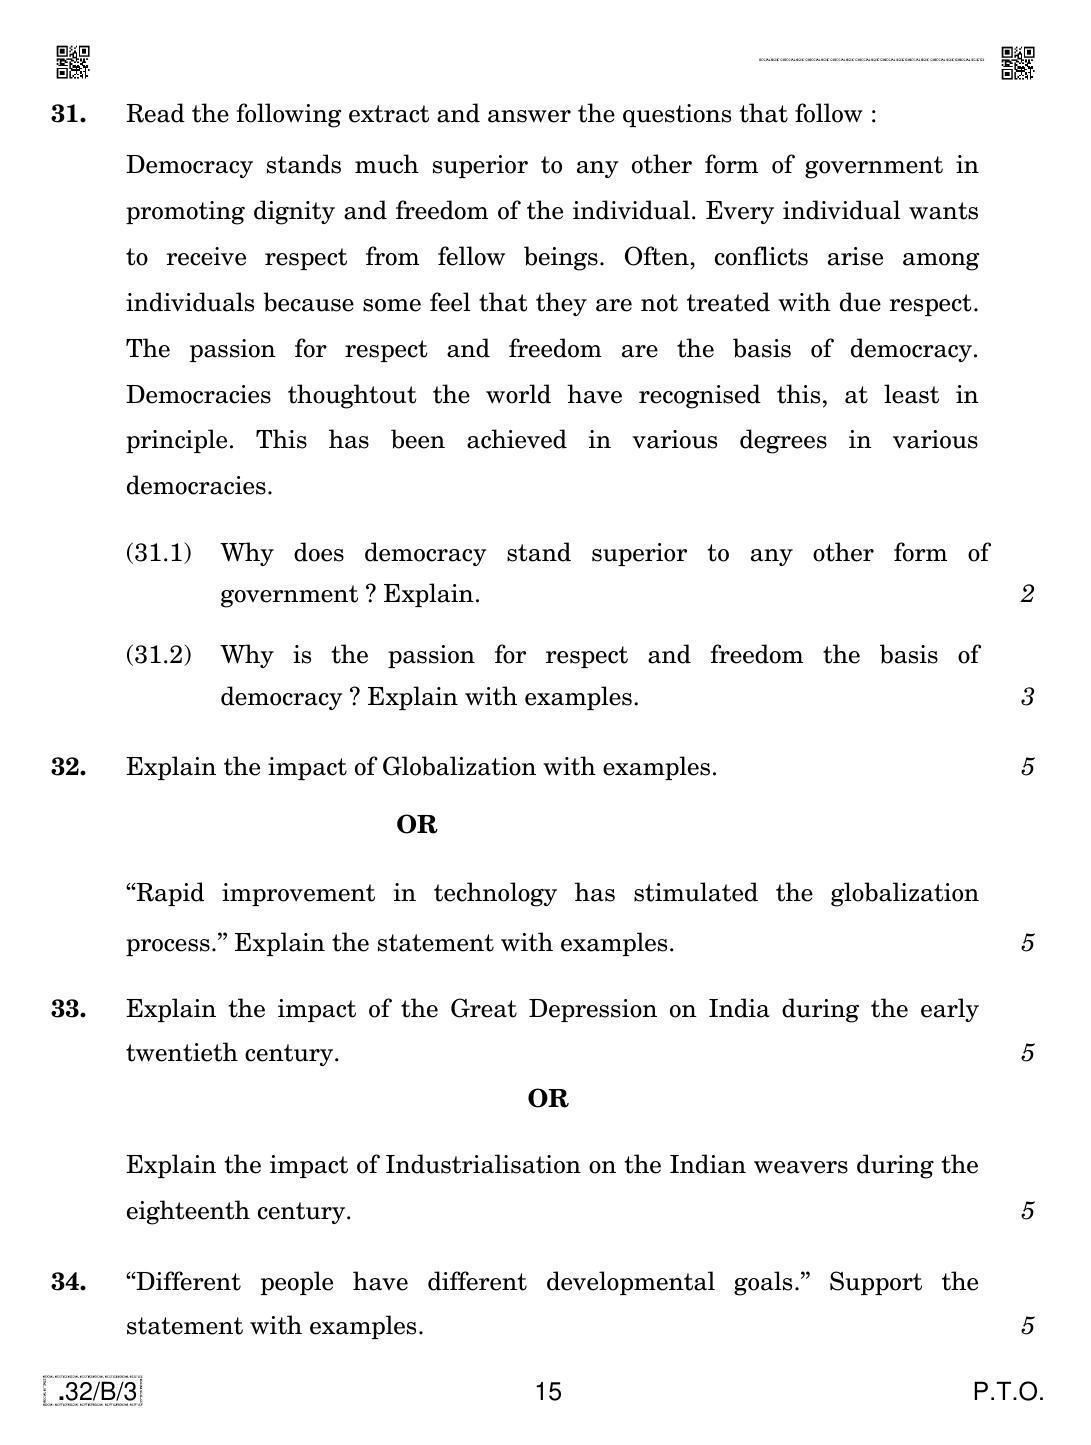 CBSE Class 10 32-C-3 Social Science 2020 Compartment Question Paper - Page 15